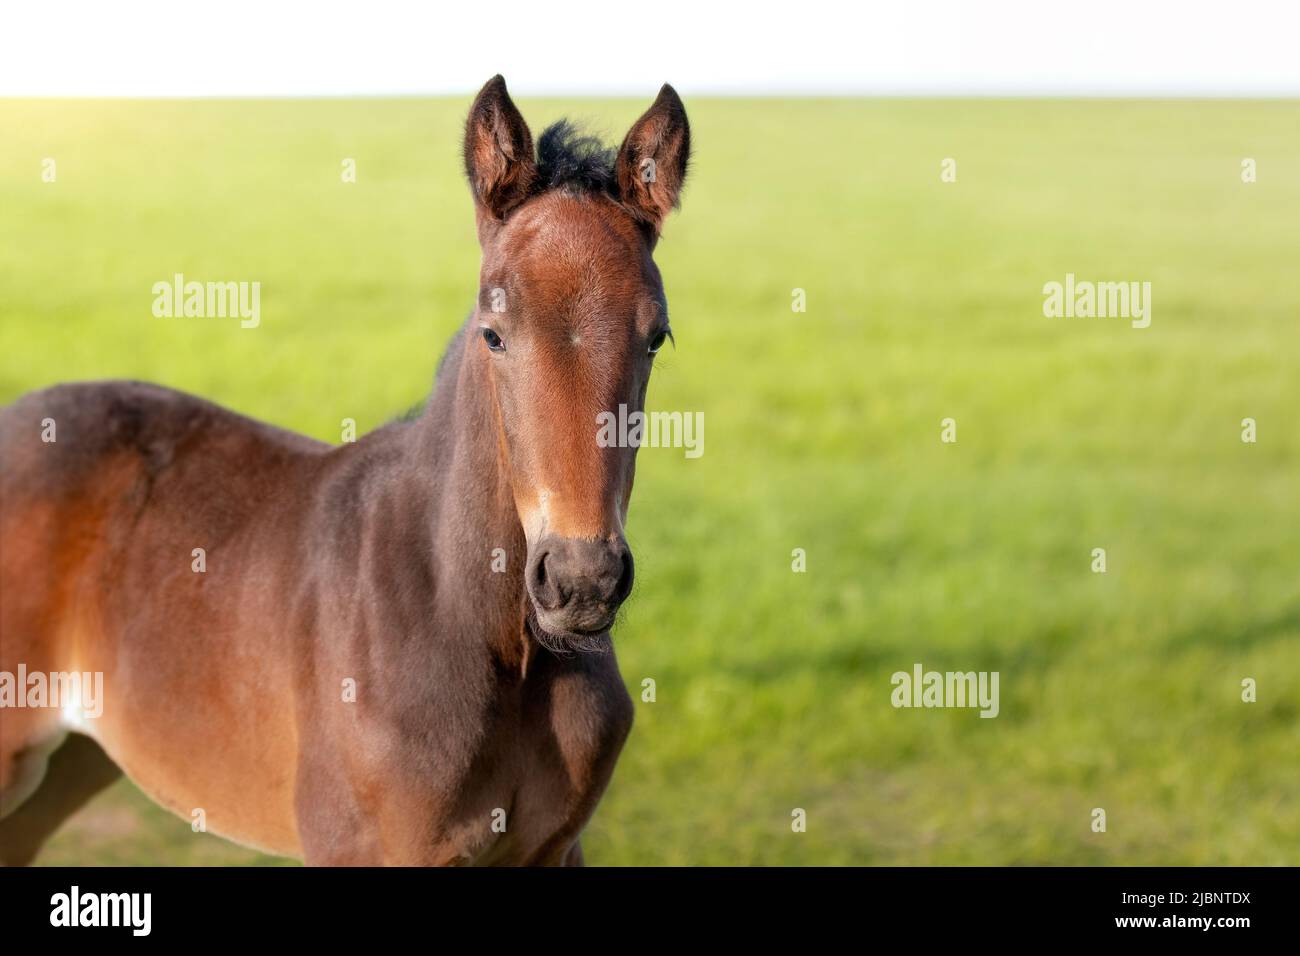 The foal head is a close-up. Portrait of a thoroughbred colt grazing in a meadow. Pasture on a sunny summer day. Summer background Stock Photo